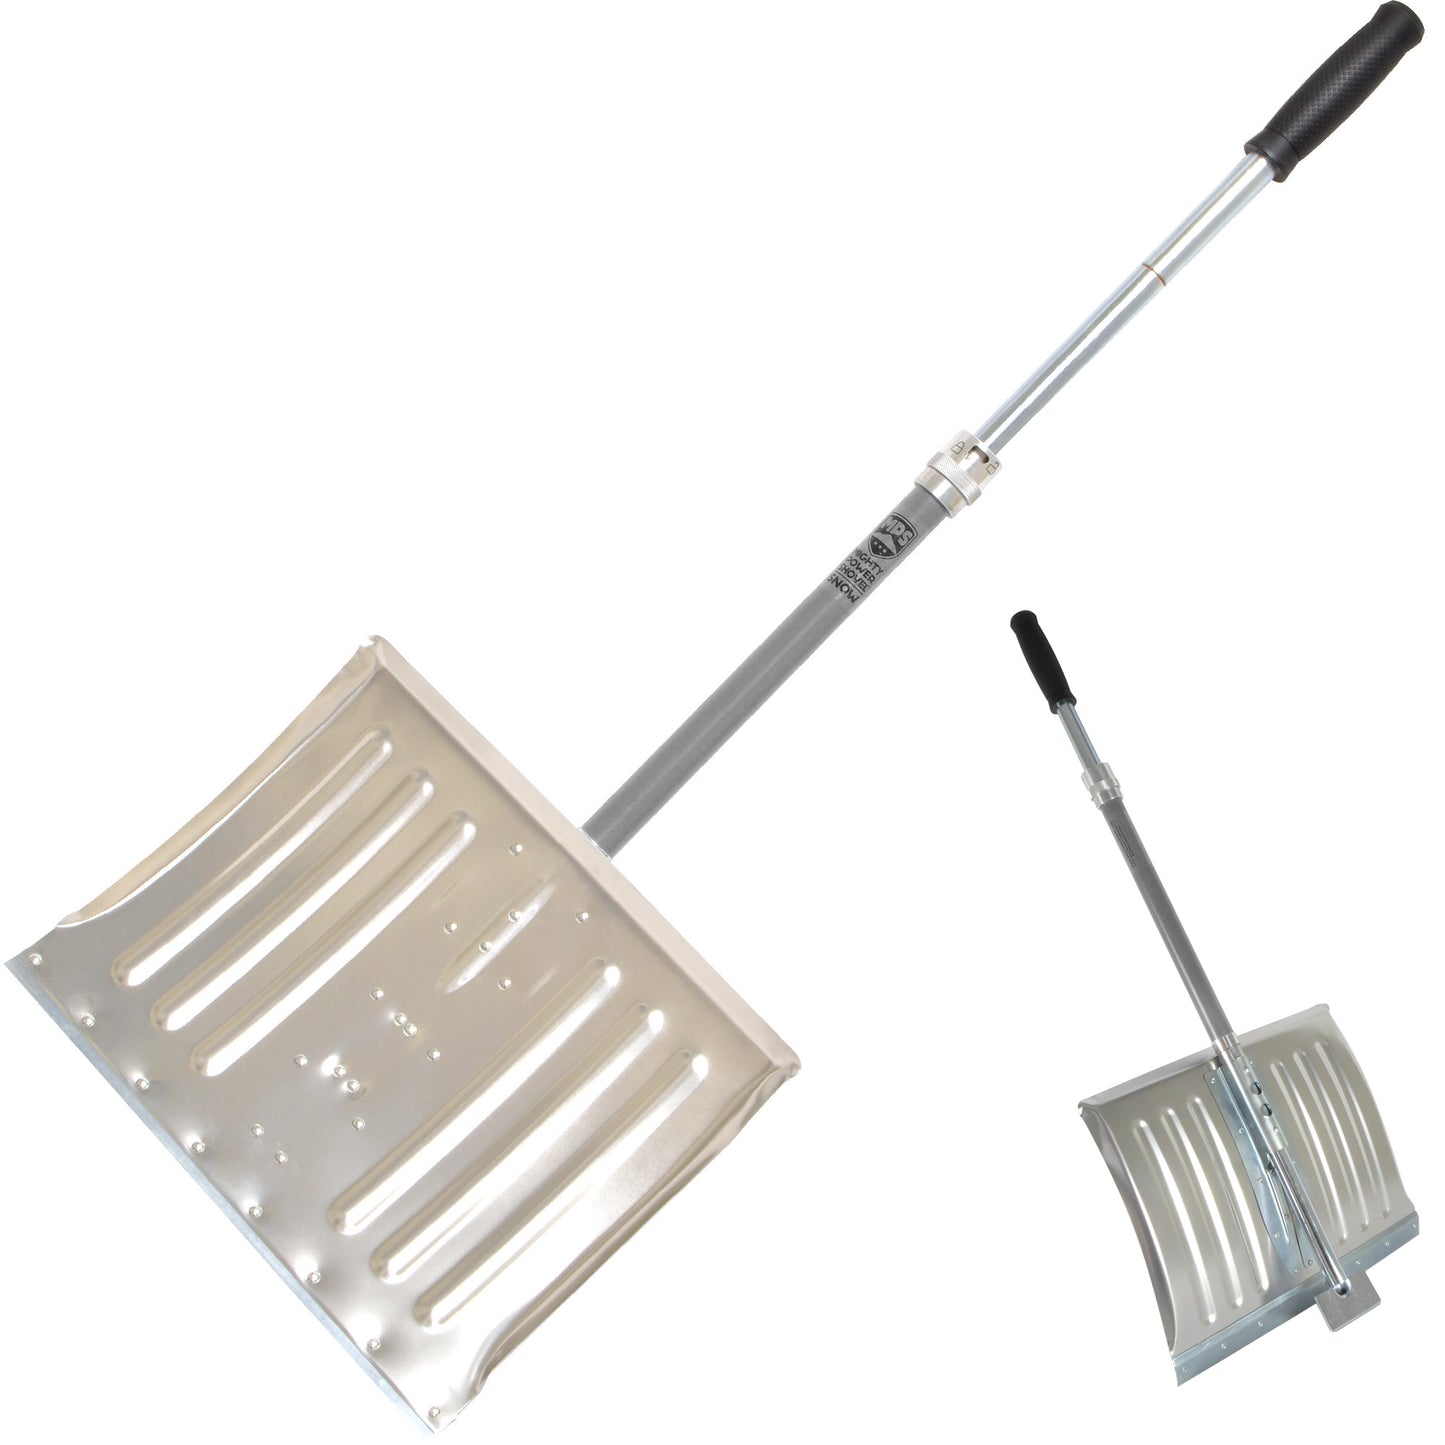 2-in-1 Collapsible Snow Shovel and Ice Chipper